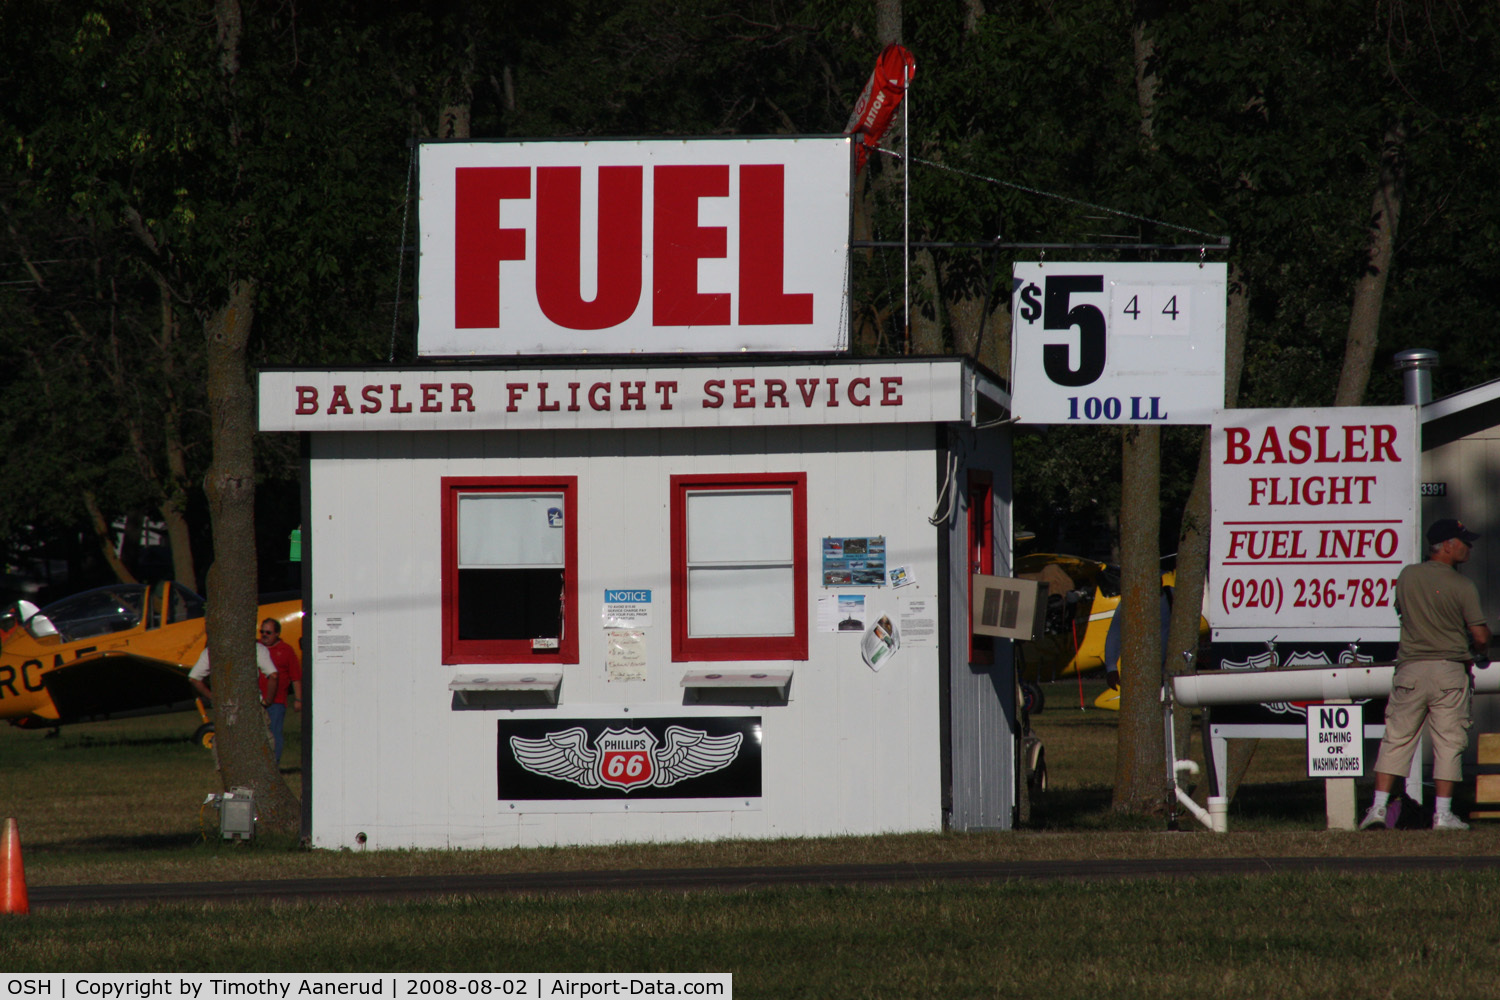 Wittman Regional Airport (OSH) - EAA AirVenture 2008, fuel payment booth on the south end of the airport